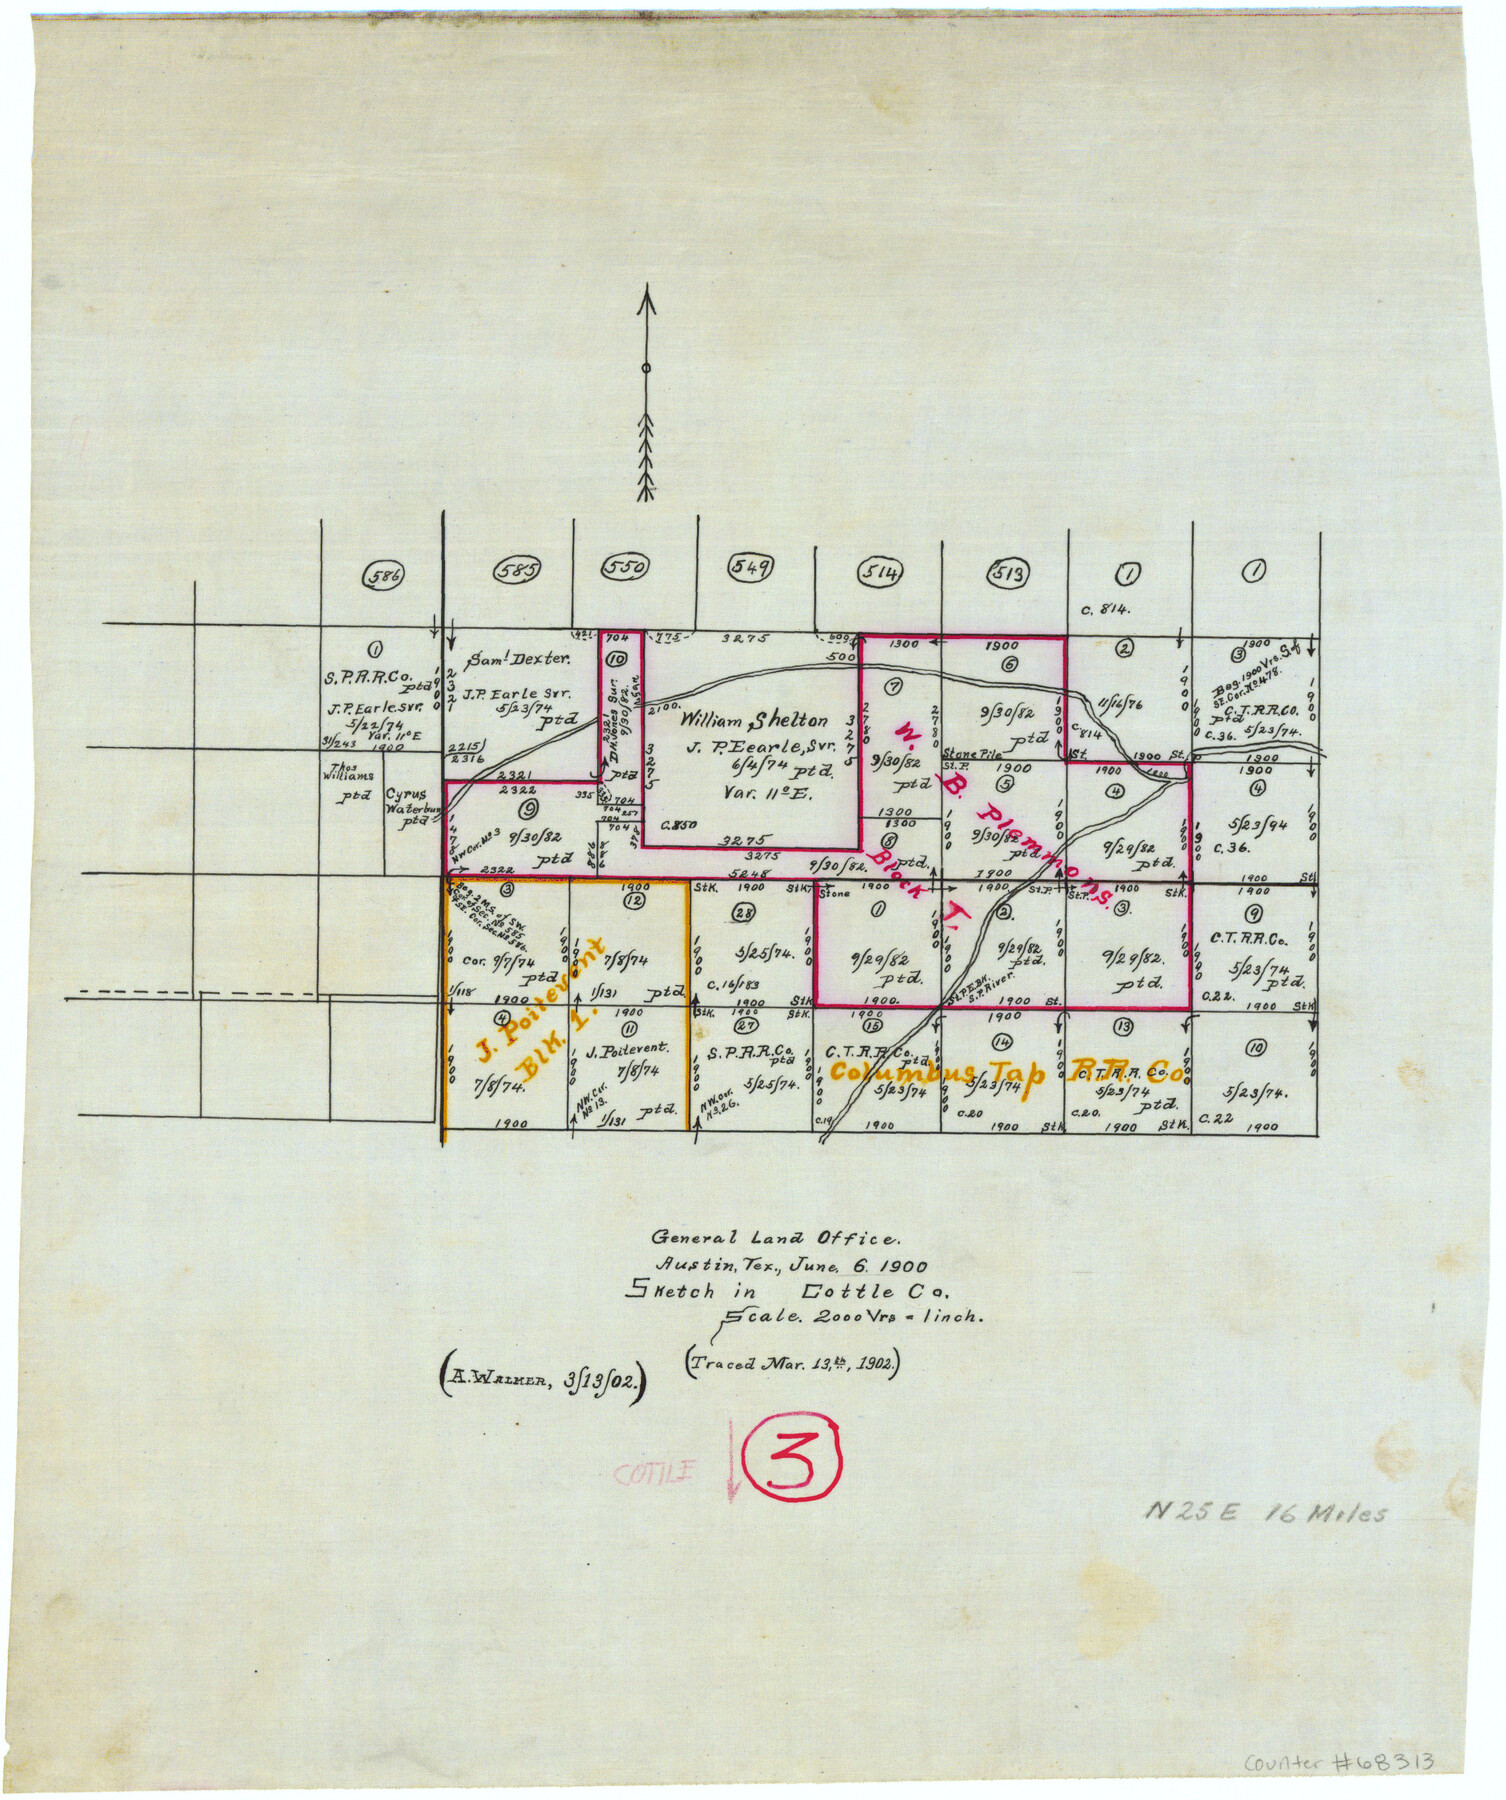 68313, Cottle County Working Sketch 3, General Map Collection